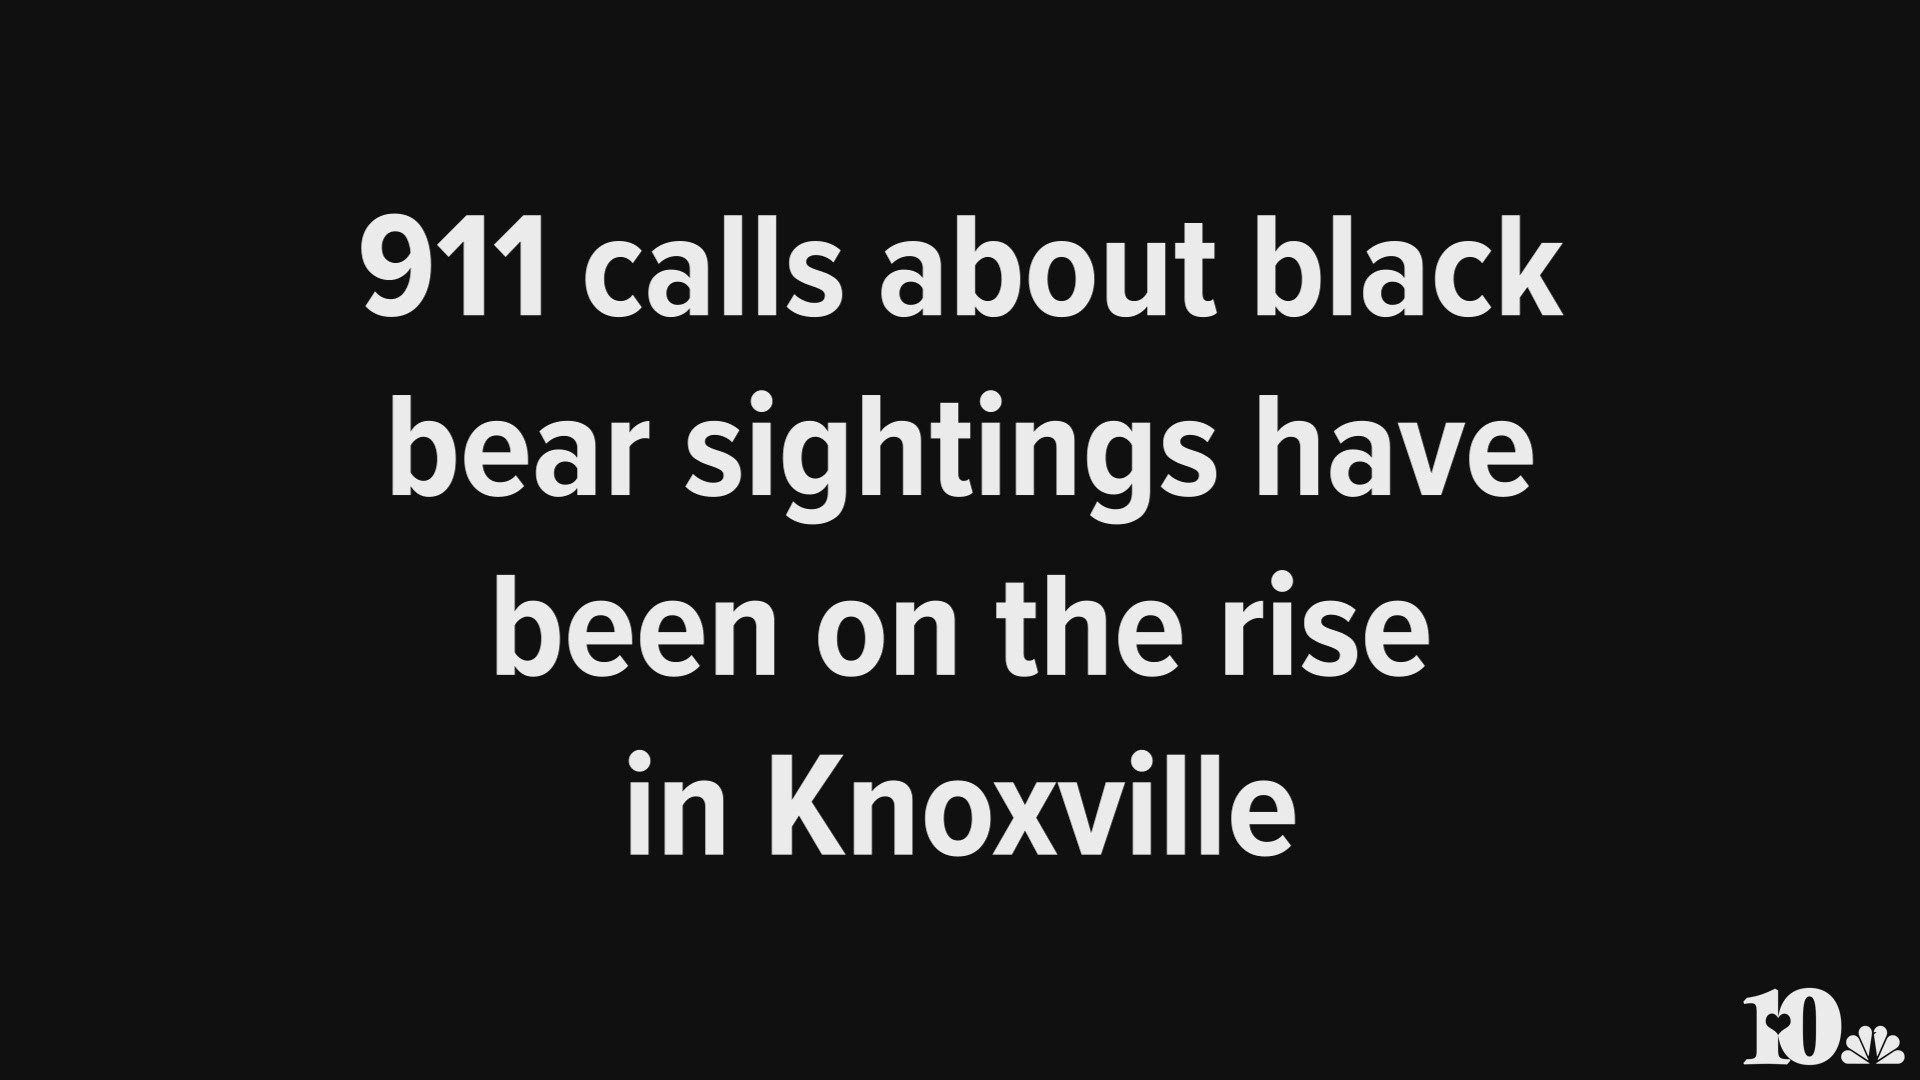 The bear sightings were mostly in Downtown and North Knoxville.